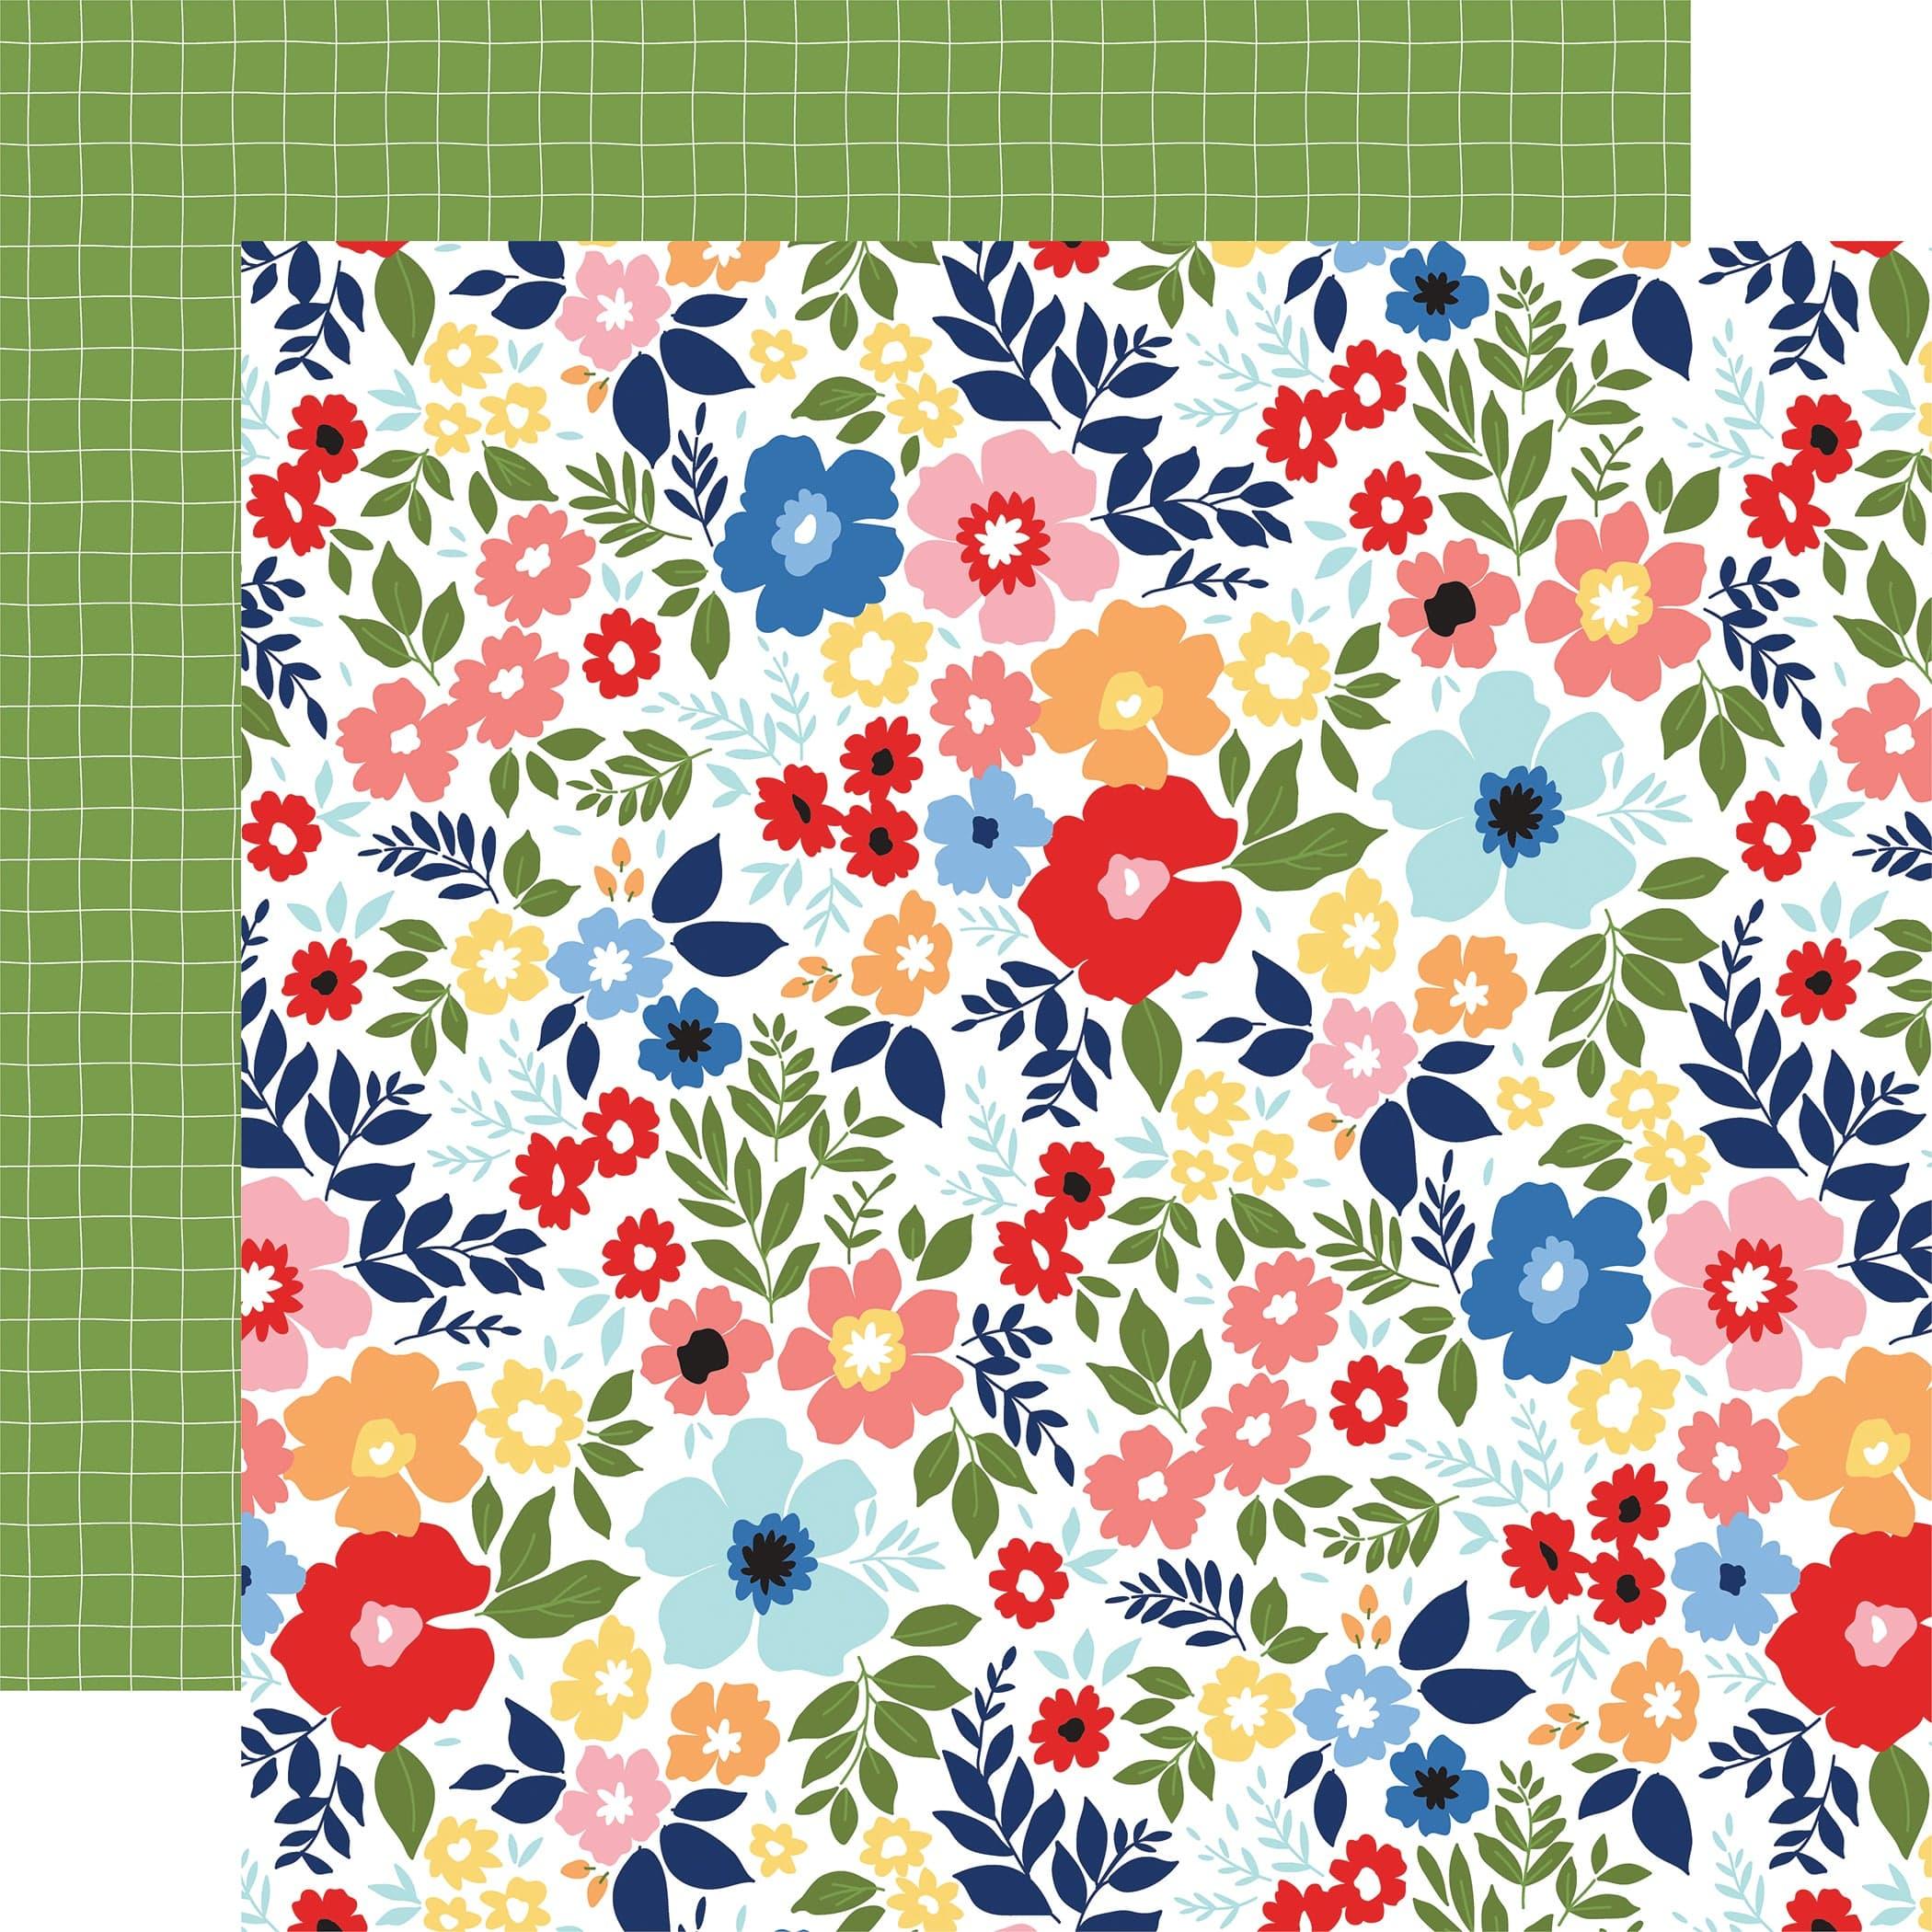 My Favorite Summer Collection Best Day Blooms 12 x 12 Double-Sided Scrapbook Paper by Echo Park Paper - Scrapbook Supply Companies